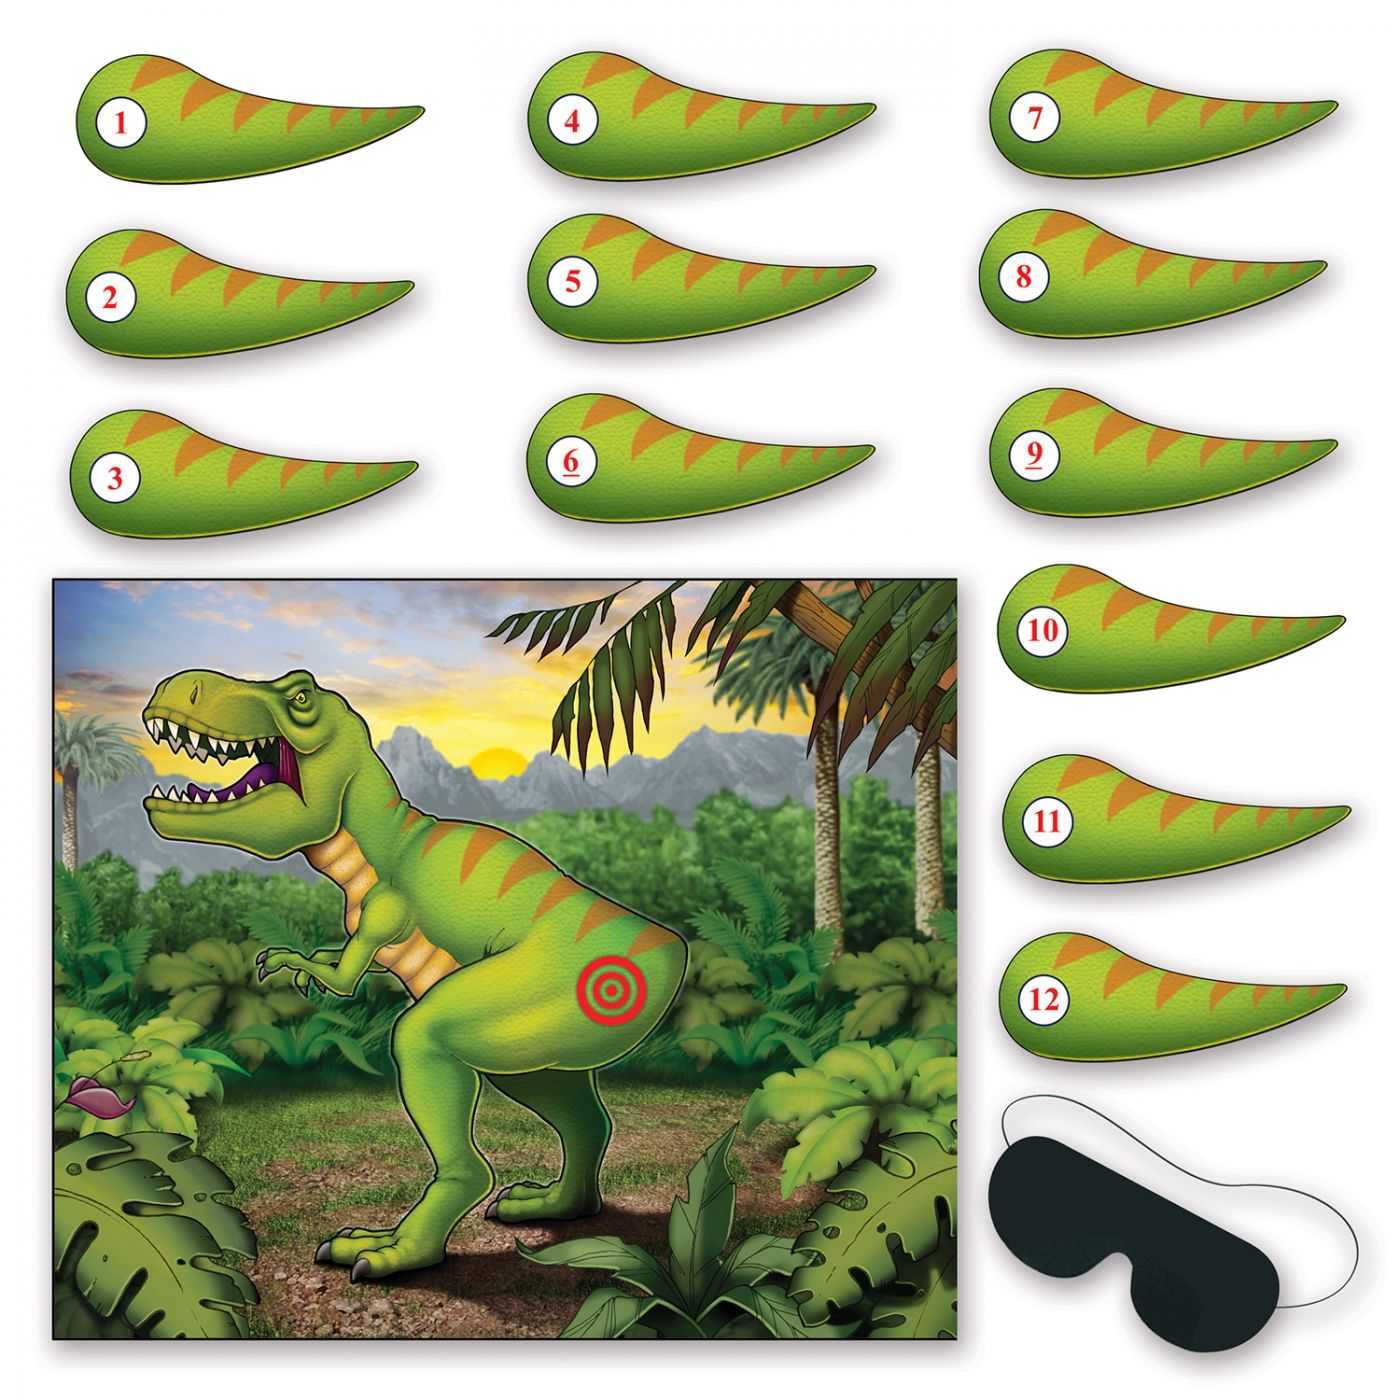 Pin The Tail On The Dinosaur Game (24) image